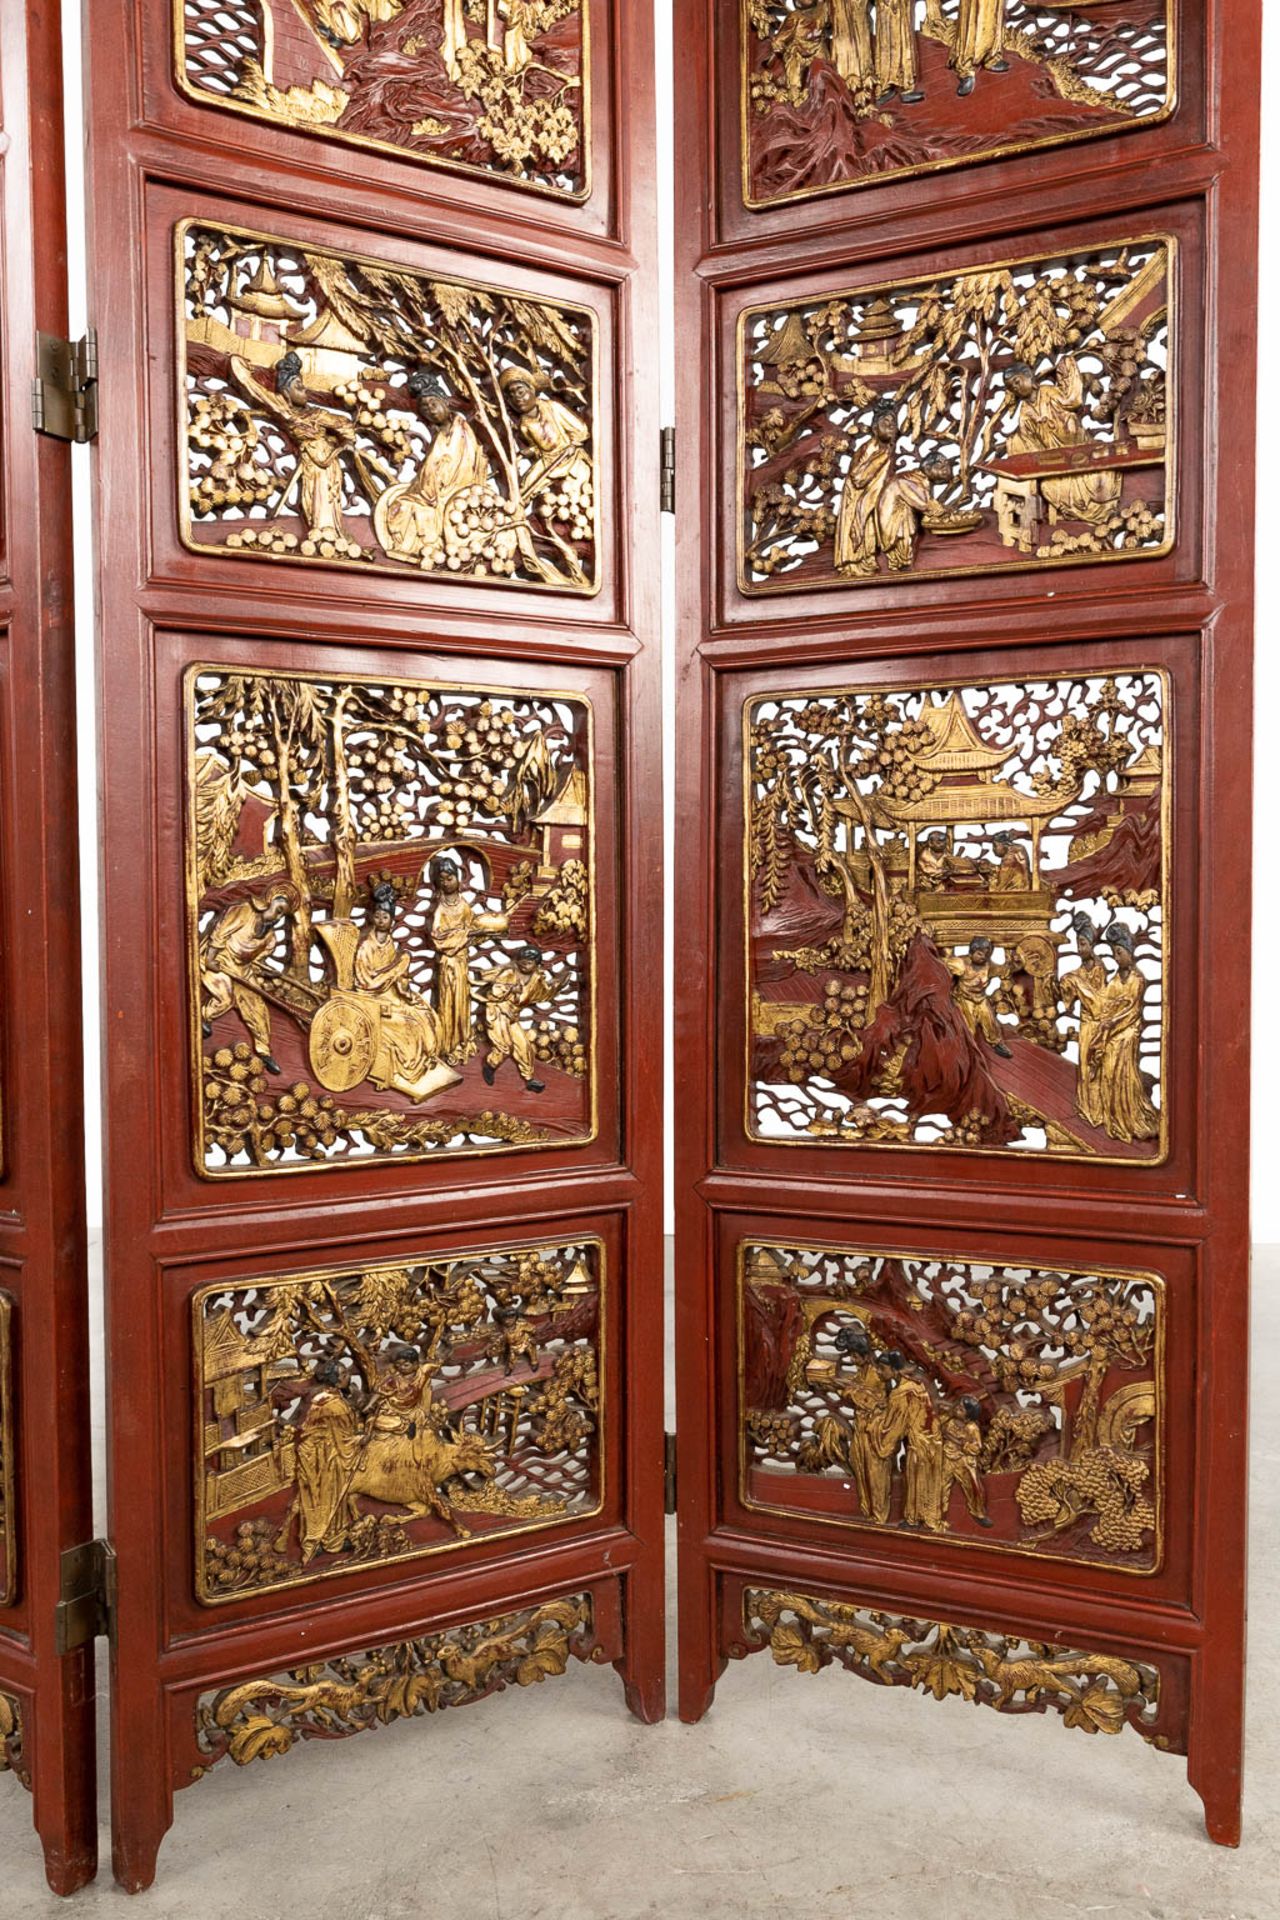 A 4-piece Chinese room divider, sculptured hardwood panels, circa 1900. (W:162 x H:185 cm) - Image 6 of 12